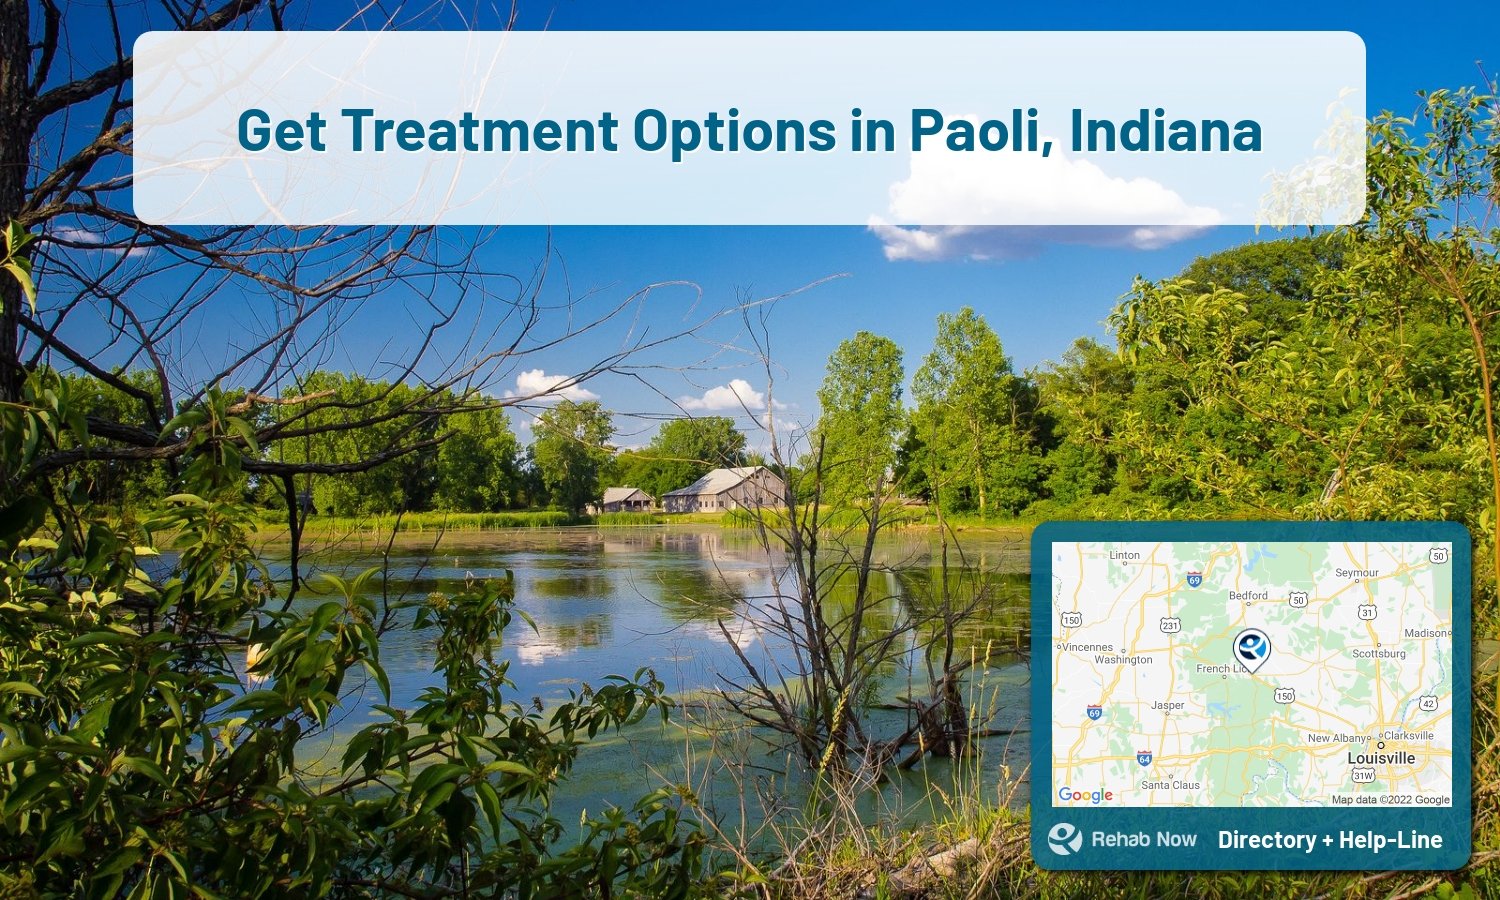 Drug rehab and alcohol treatment services near you in Paoli, Indiana. Need help choosing a center? Call us, free.